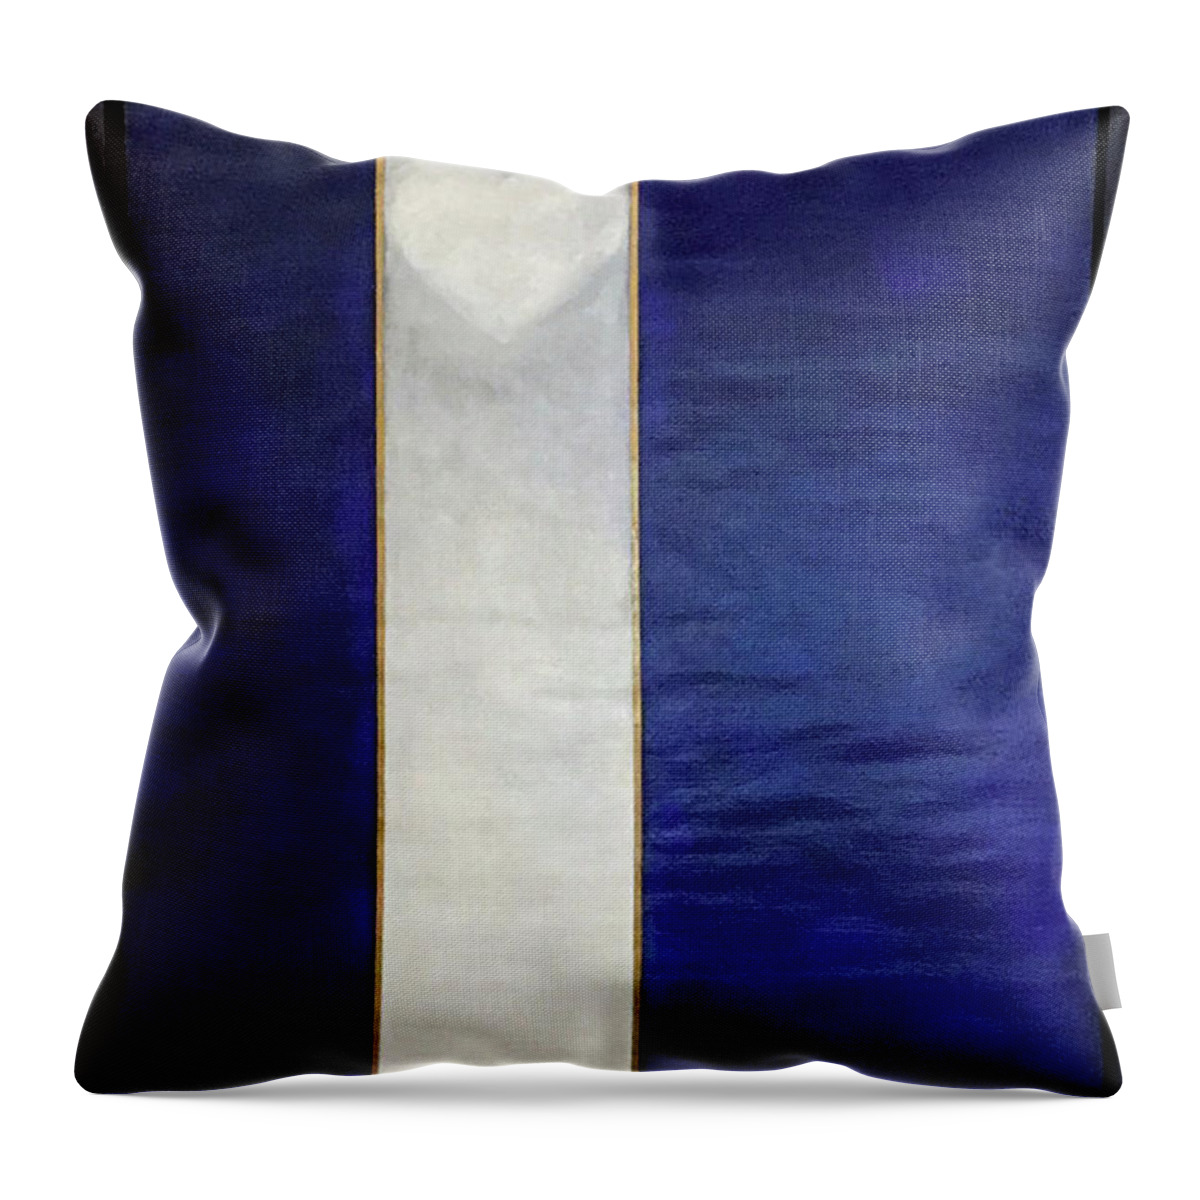  Throw Pillow featuring the painting Ascending Heart by James Lanigan Thompson MFA